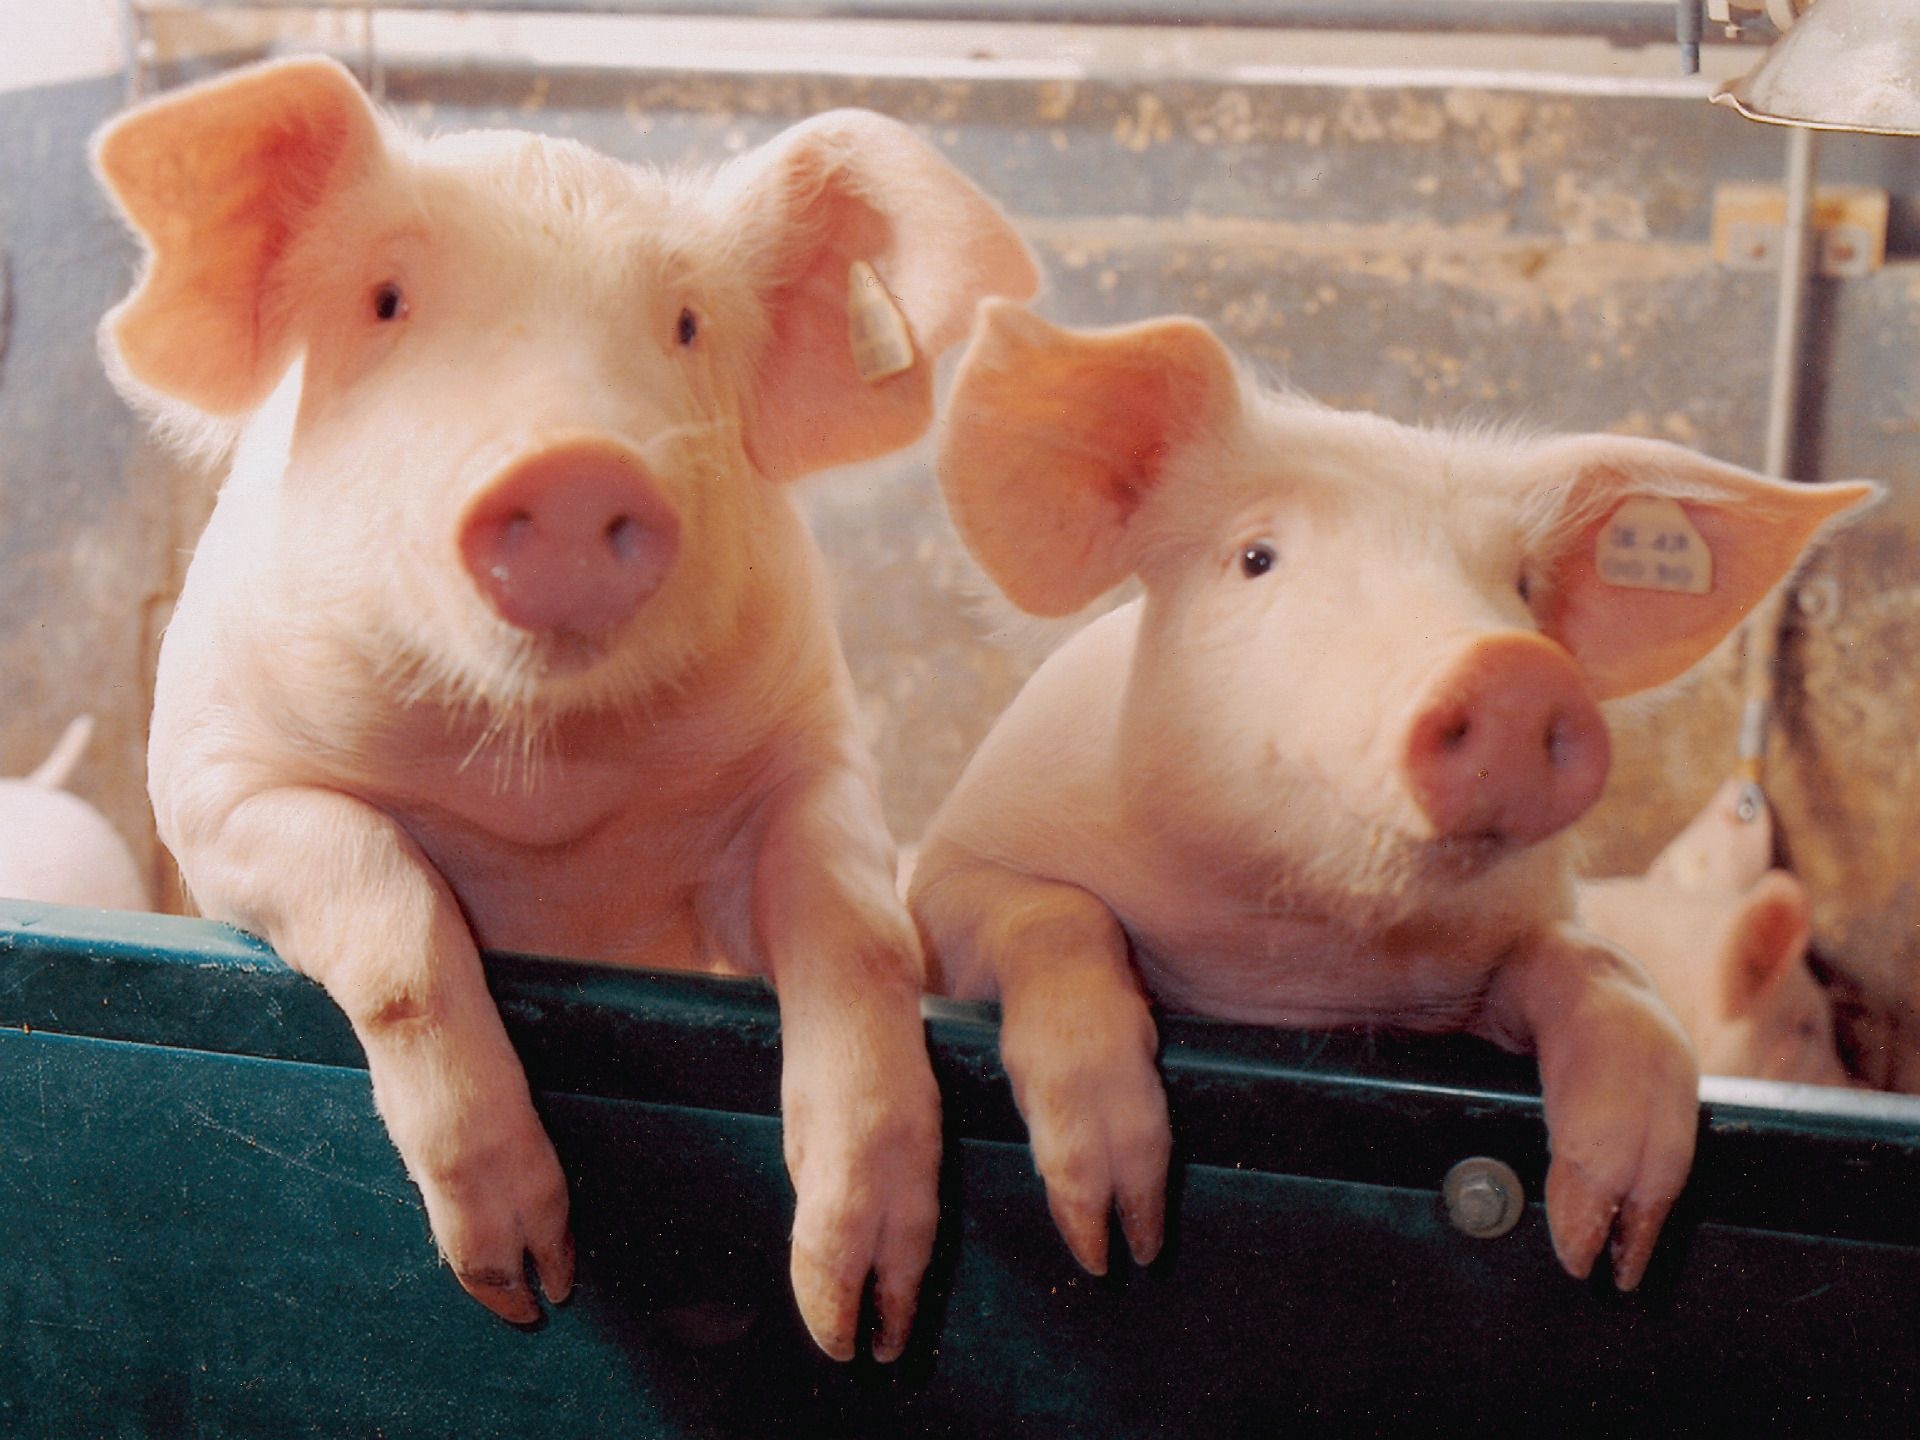 Pigs at play, Friendly farm animals, Oink and snort, Captivating cuties, 1920x1440 HD Desktop